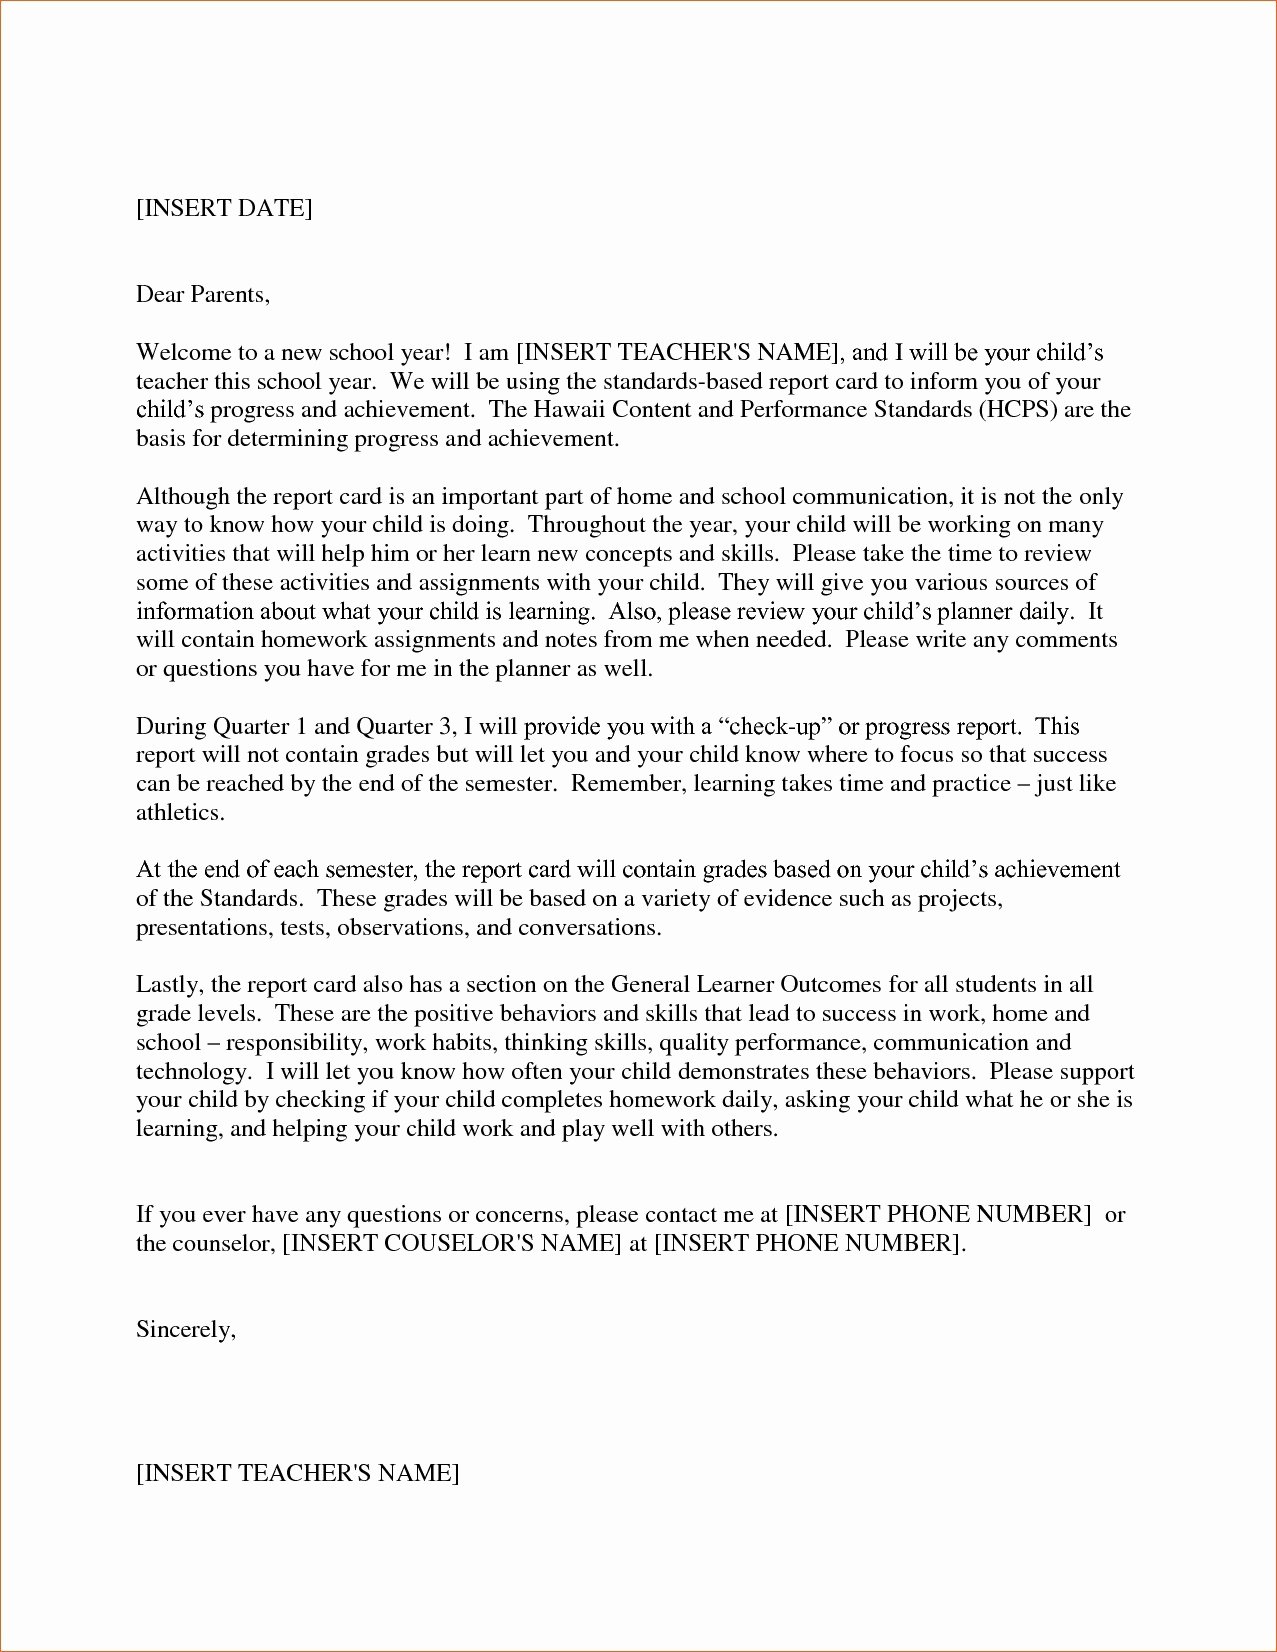 Letter to Parent Template Inspirational Teacher Wel E Letter to Parents Template Samples